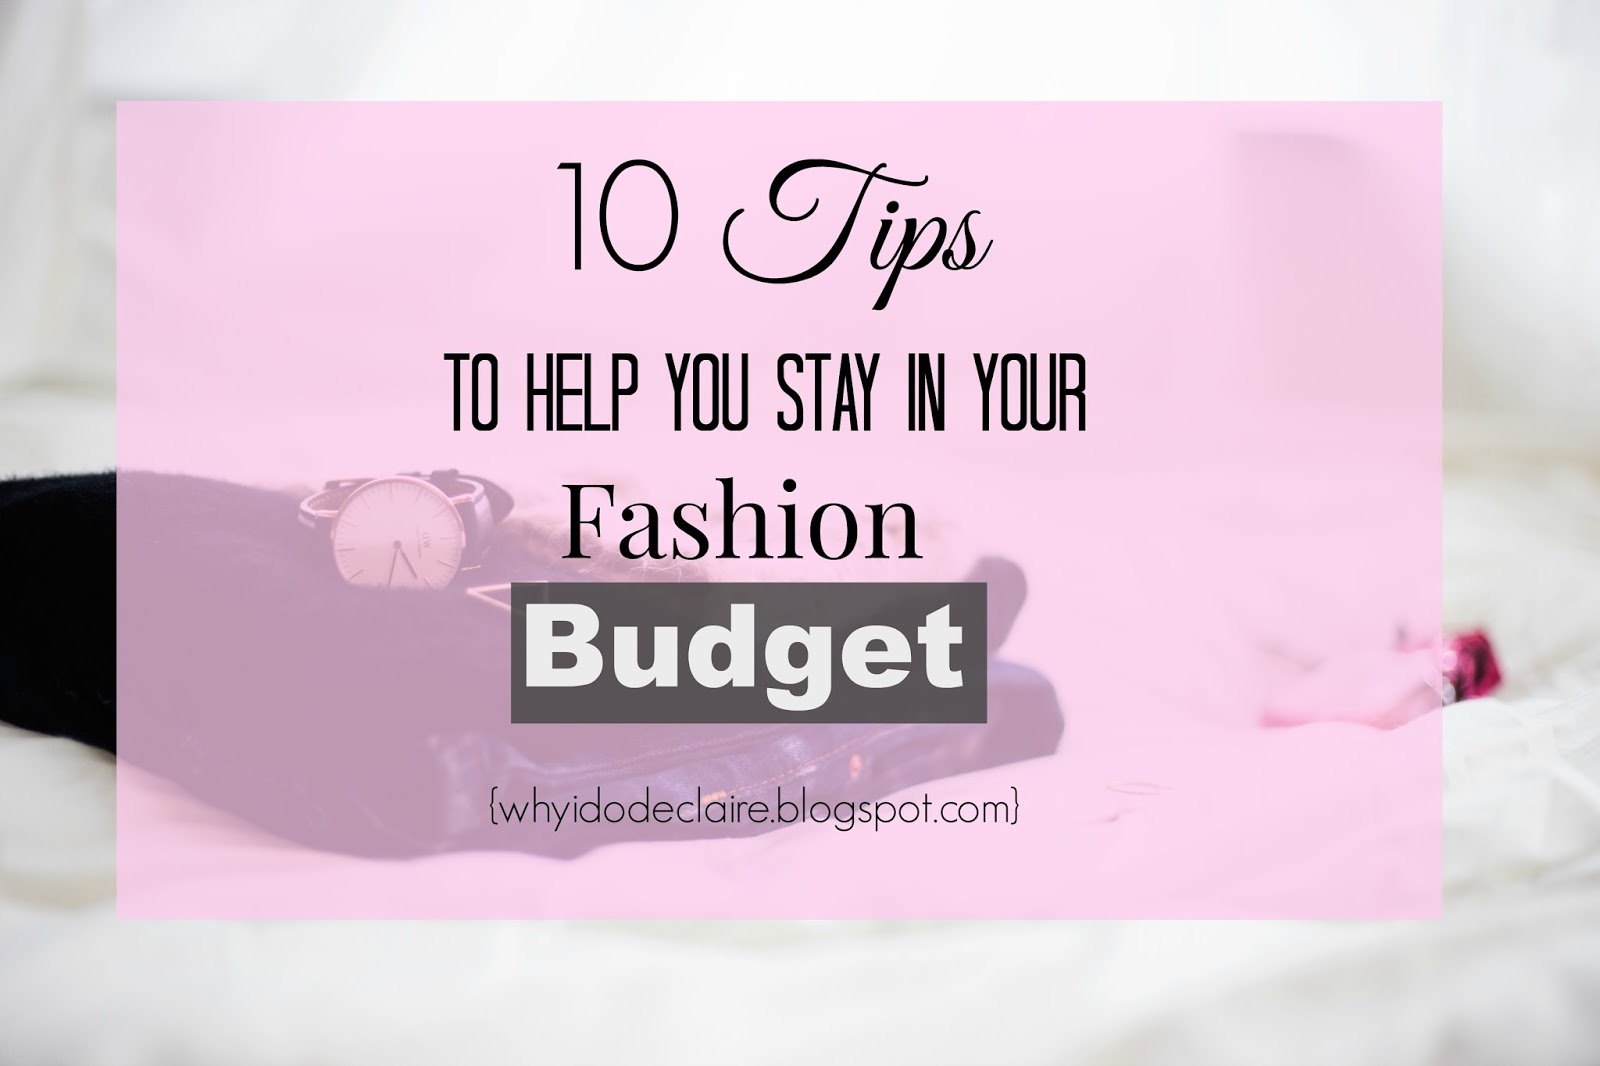 10 Tips to Stay in Your Fashion Budget